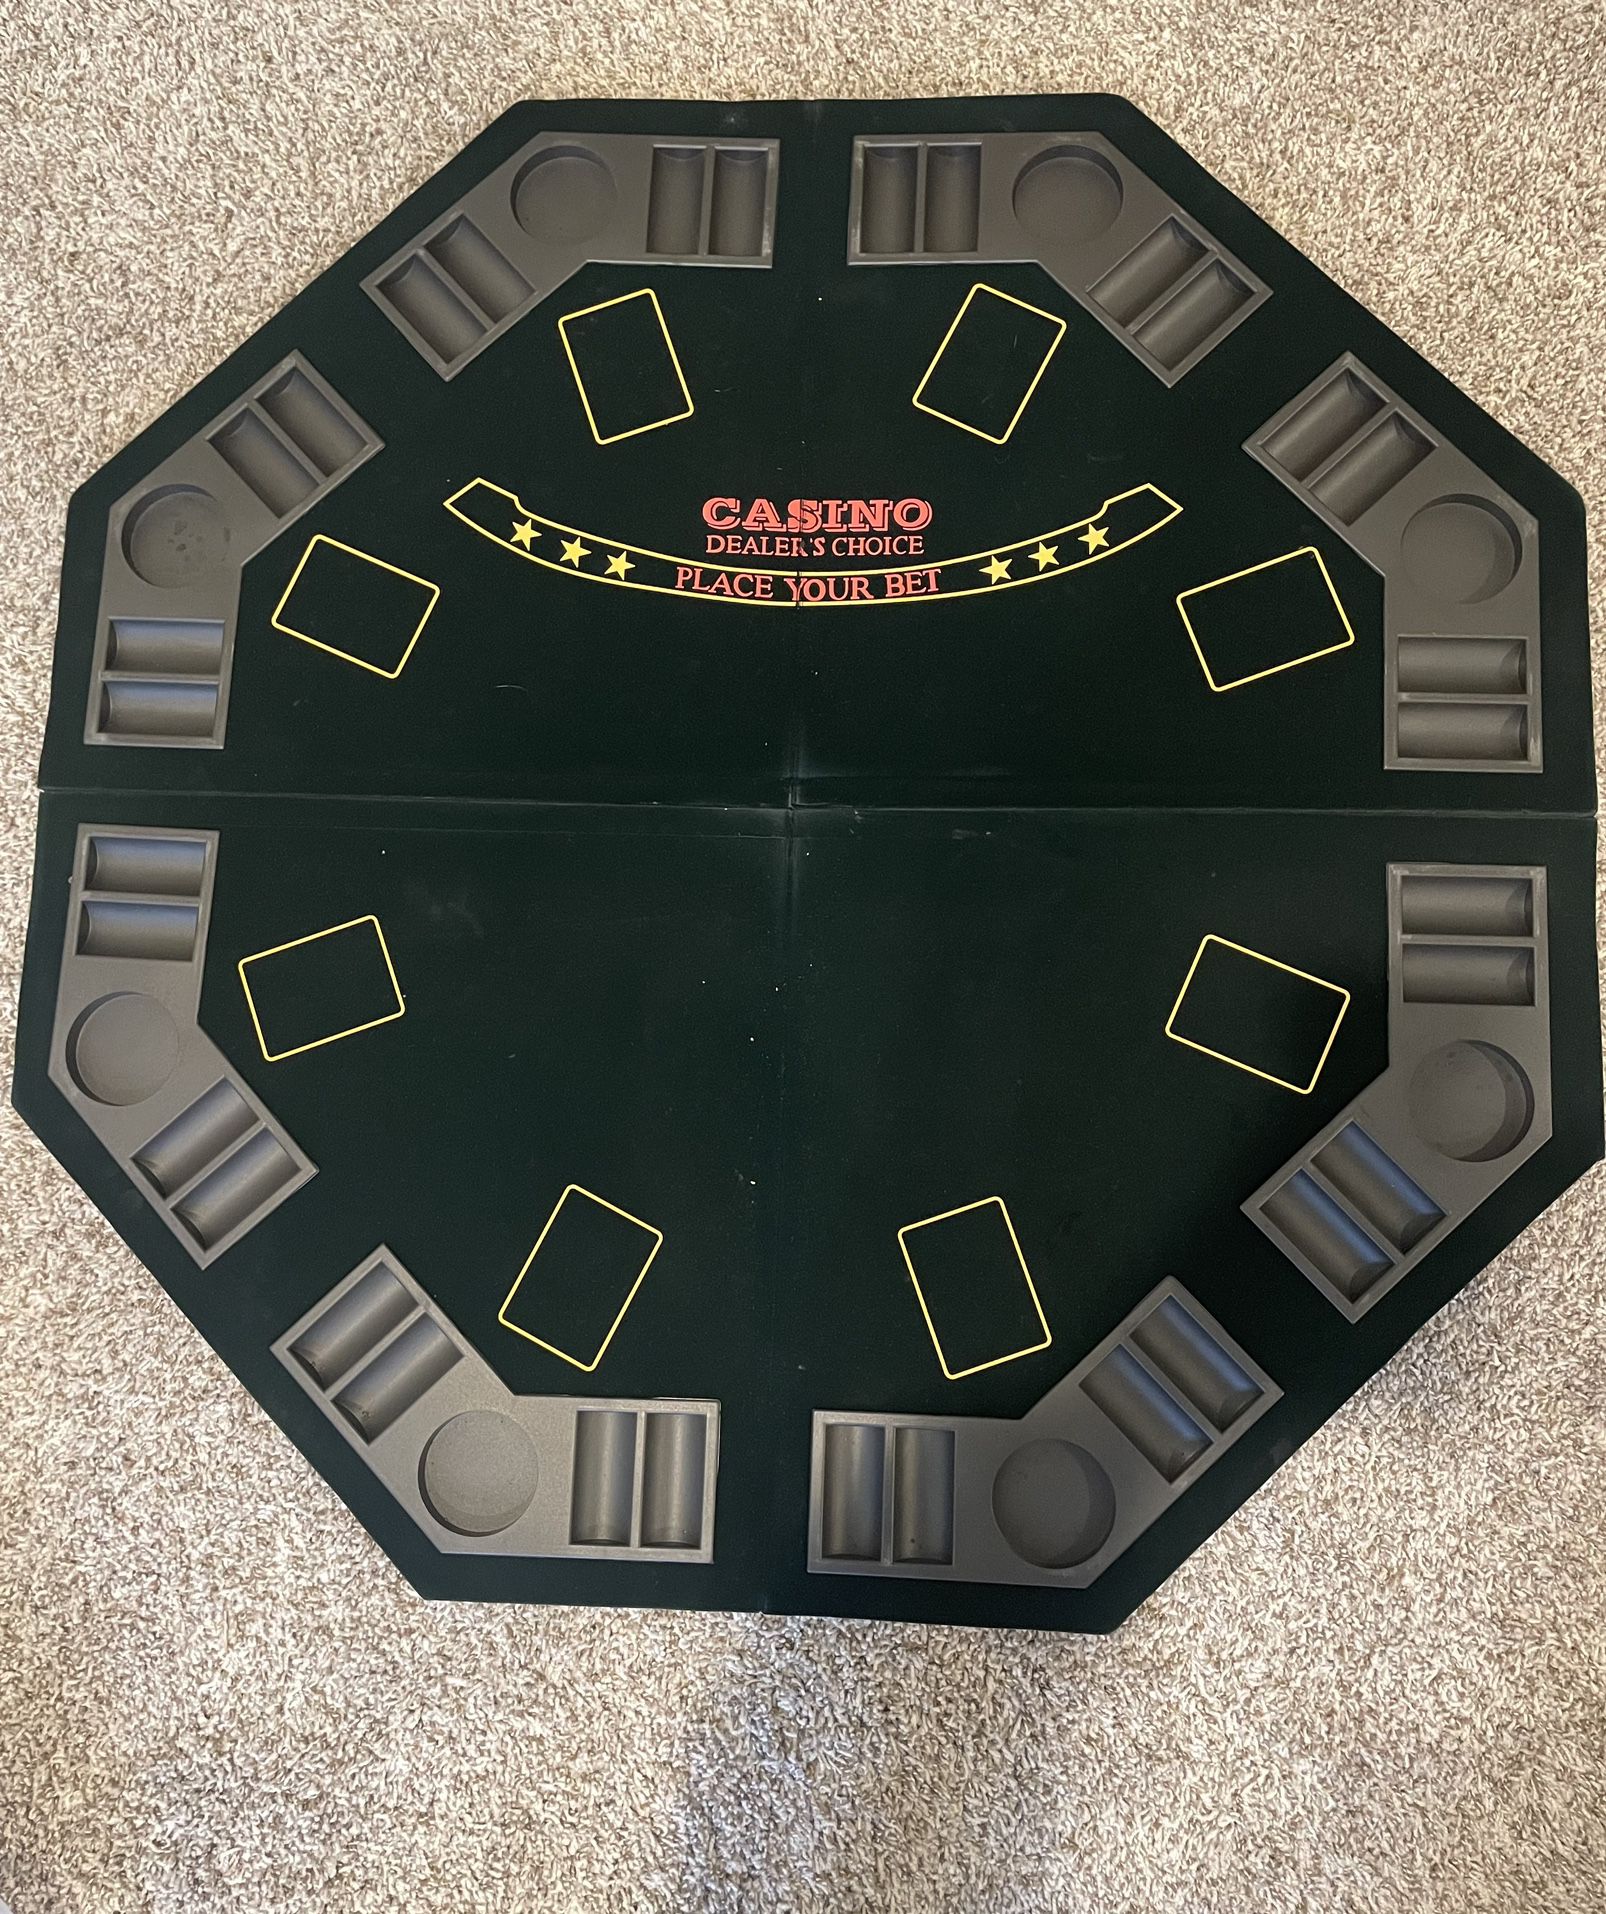 Cardinal Black Jack/Poker Table Top 47x47 Casino-Quality Green Playing Surface